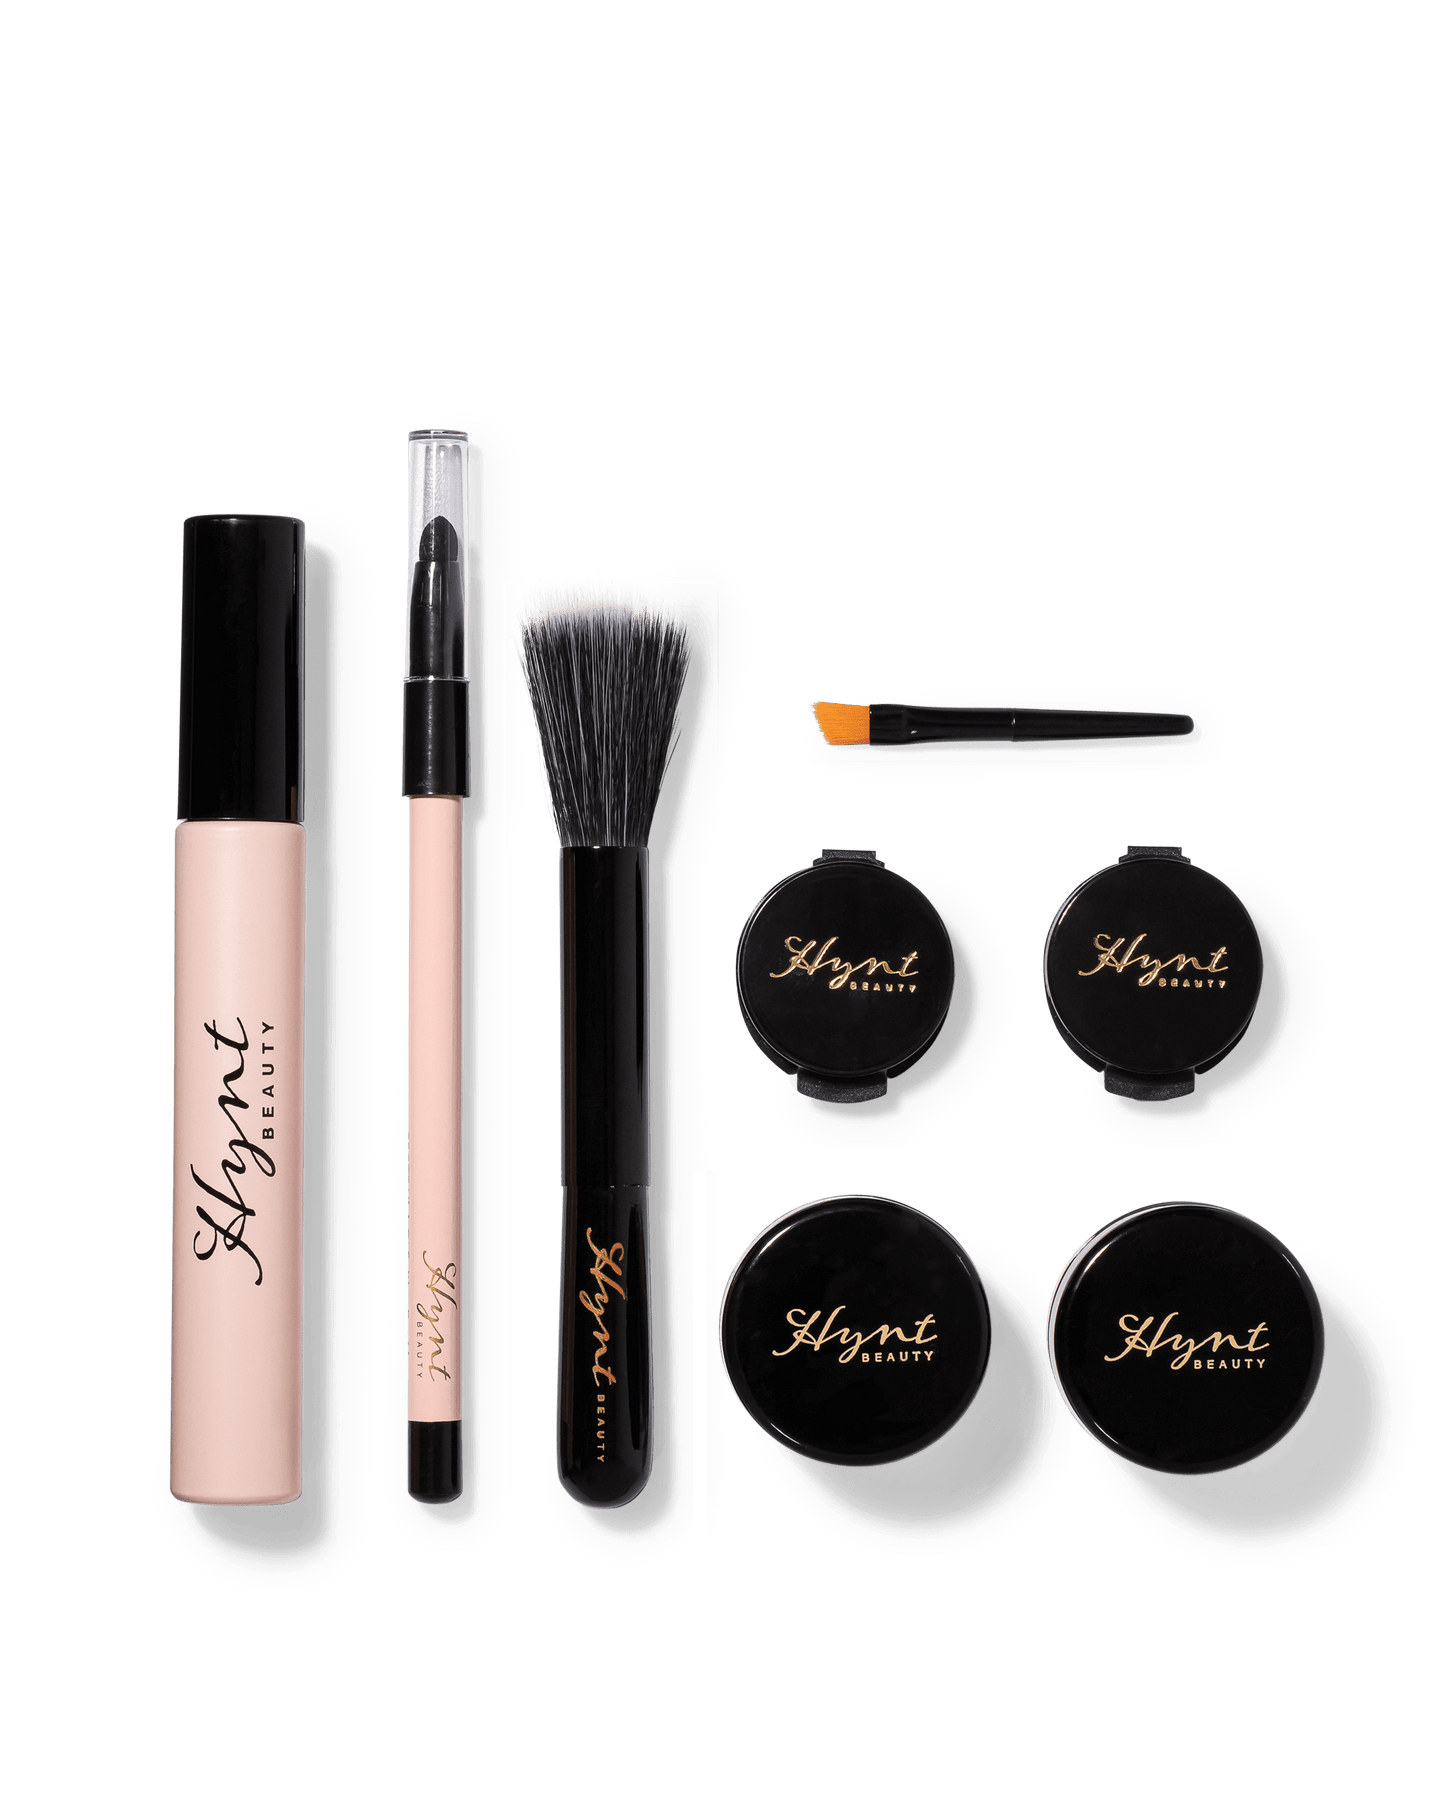 ${ title} at $46 only from Hynt Beauty